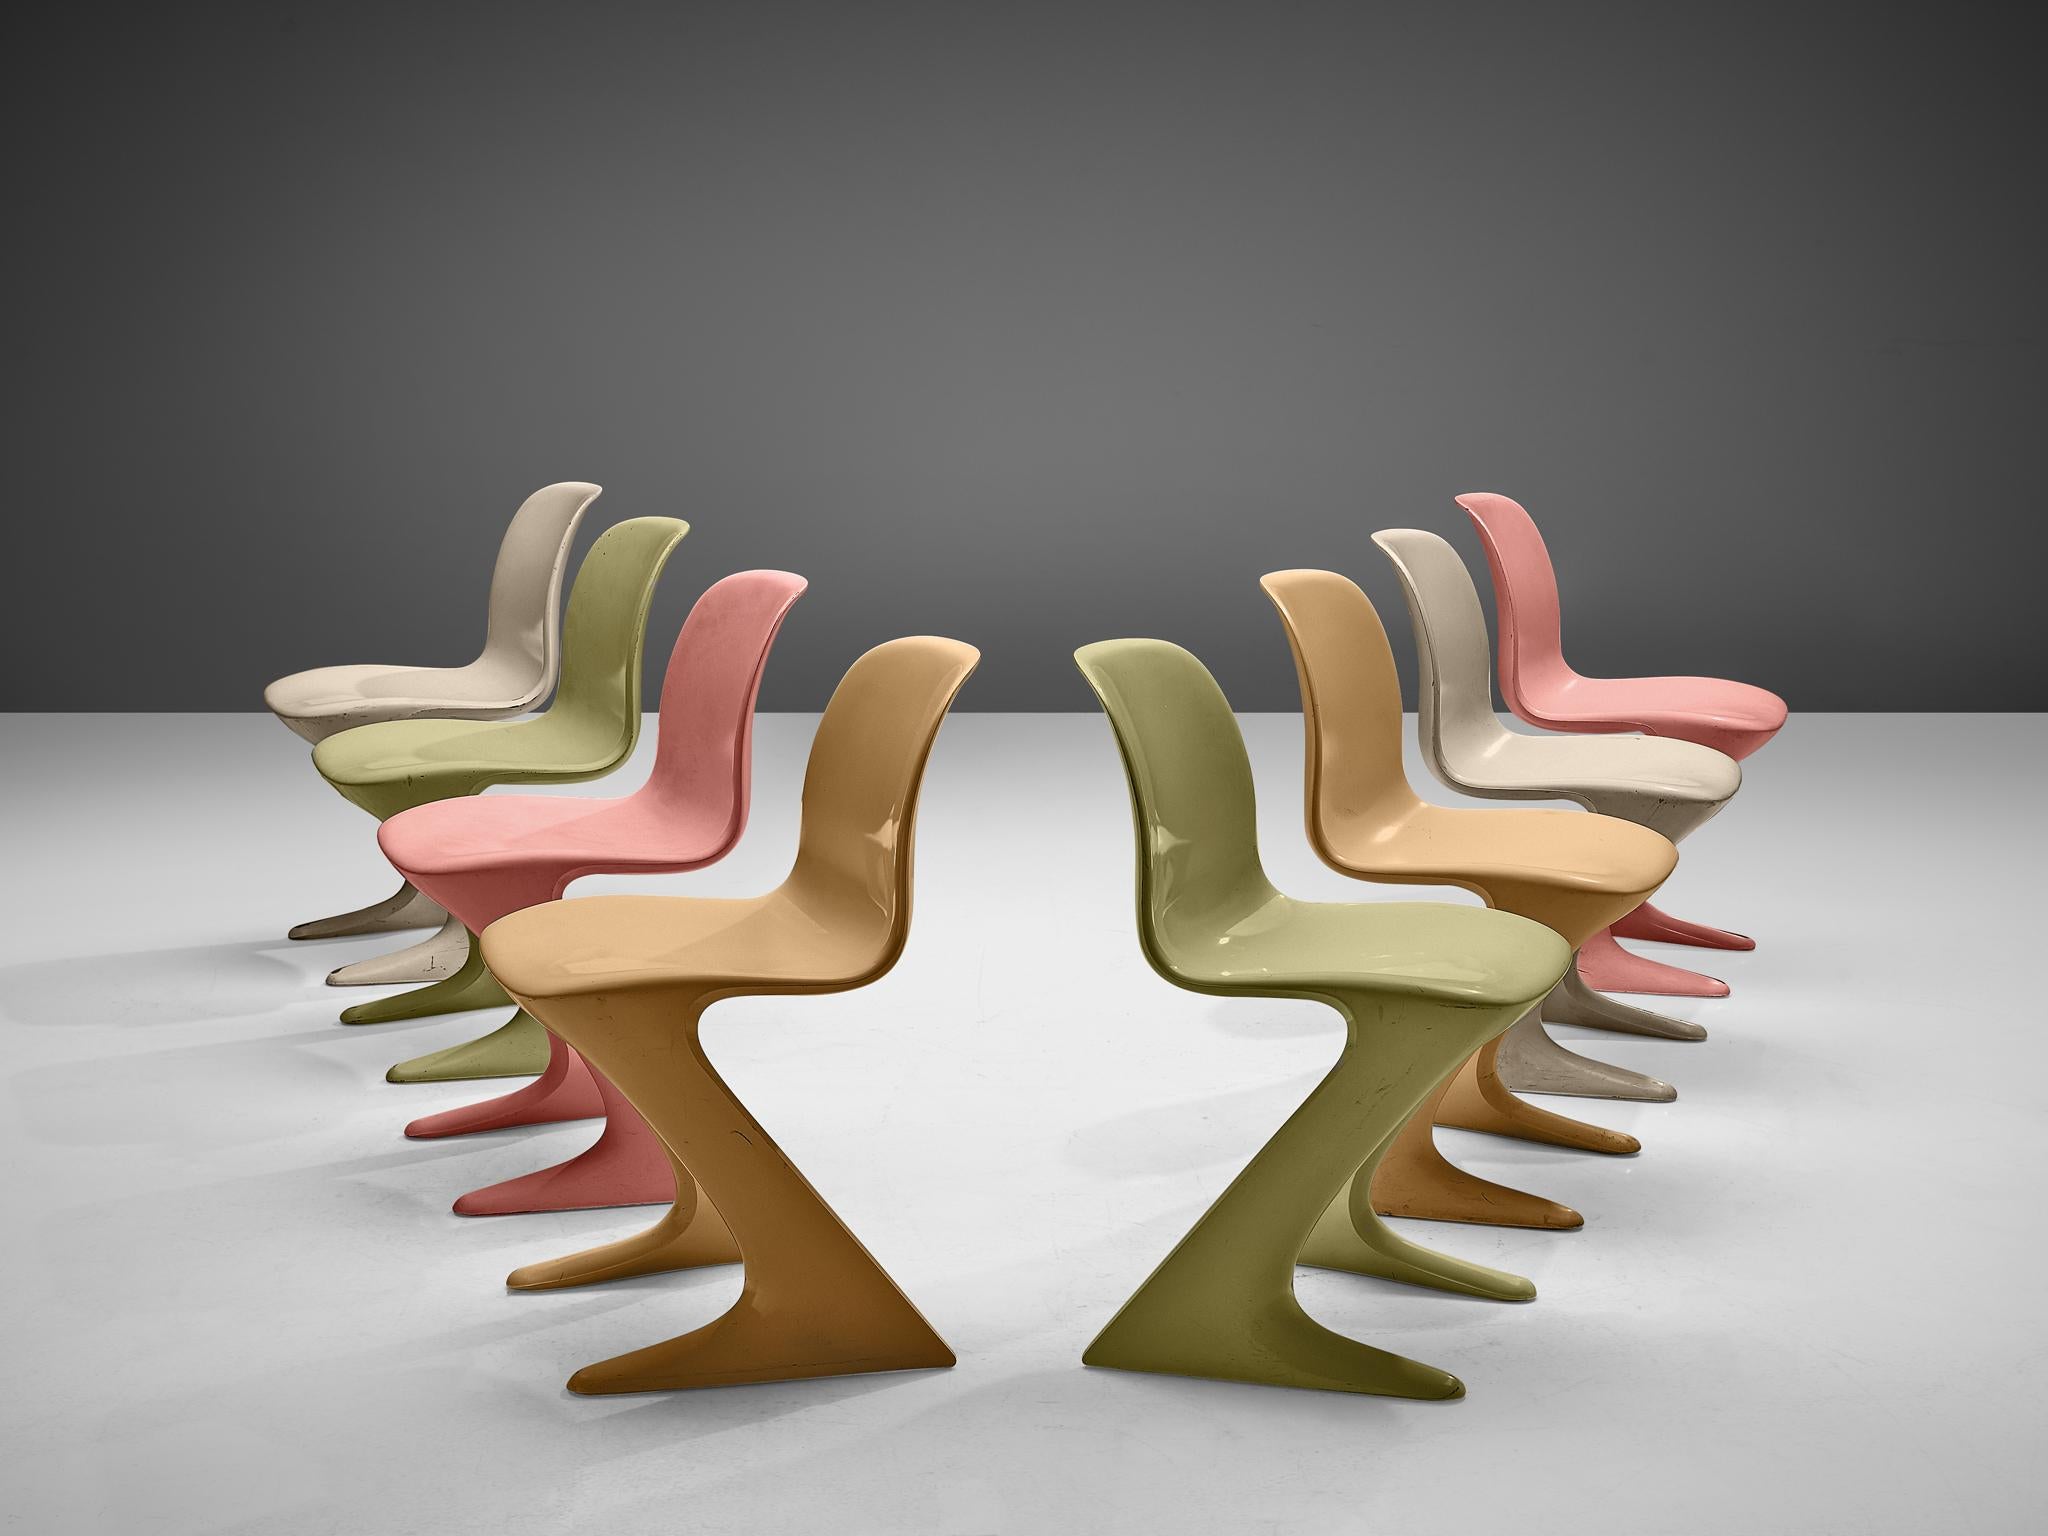 Ernst Moeckl for Trabant, set of eight 'Z' chairs, fiberglass, Germany, 1968

This set of pastel colored Kangaroo chairs is designed by Ernste Moeckl in 1968. The chair is also called the Z-chair, referring to its shape. During the period of the